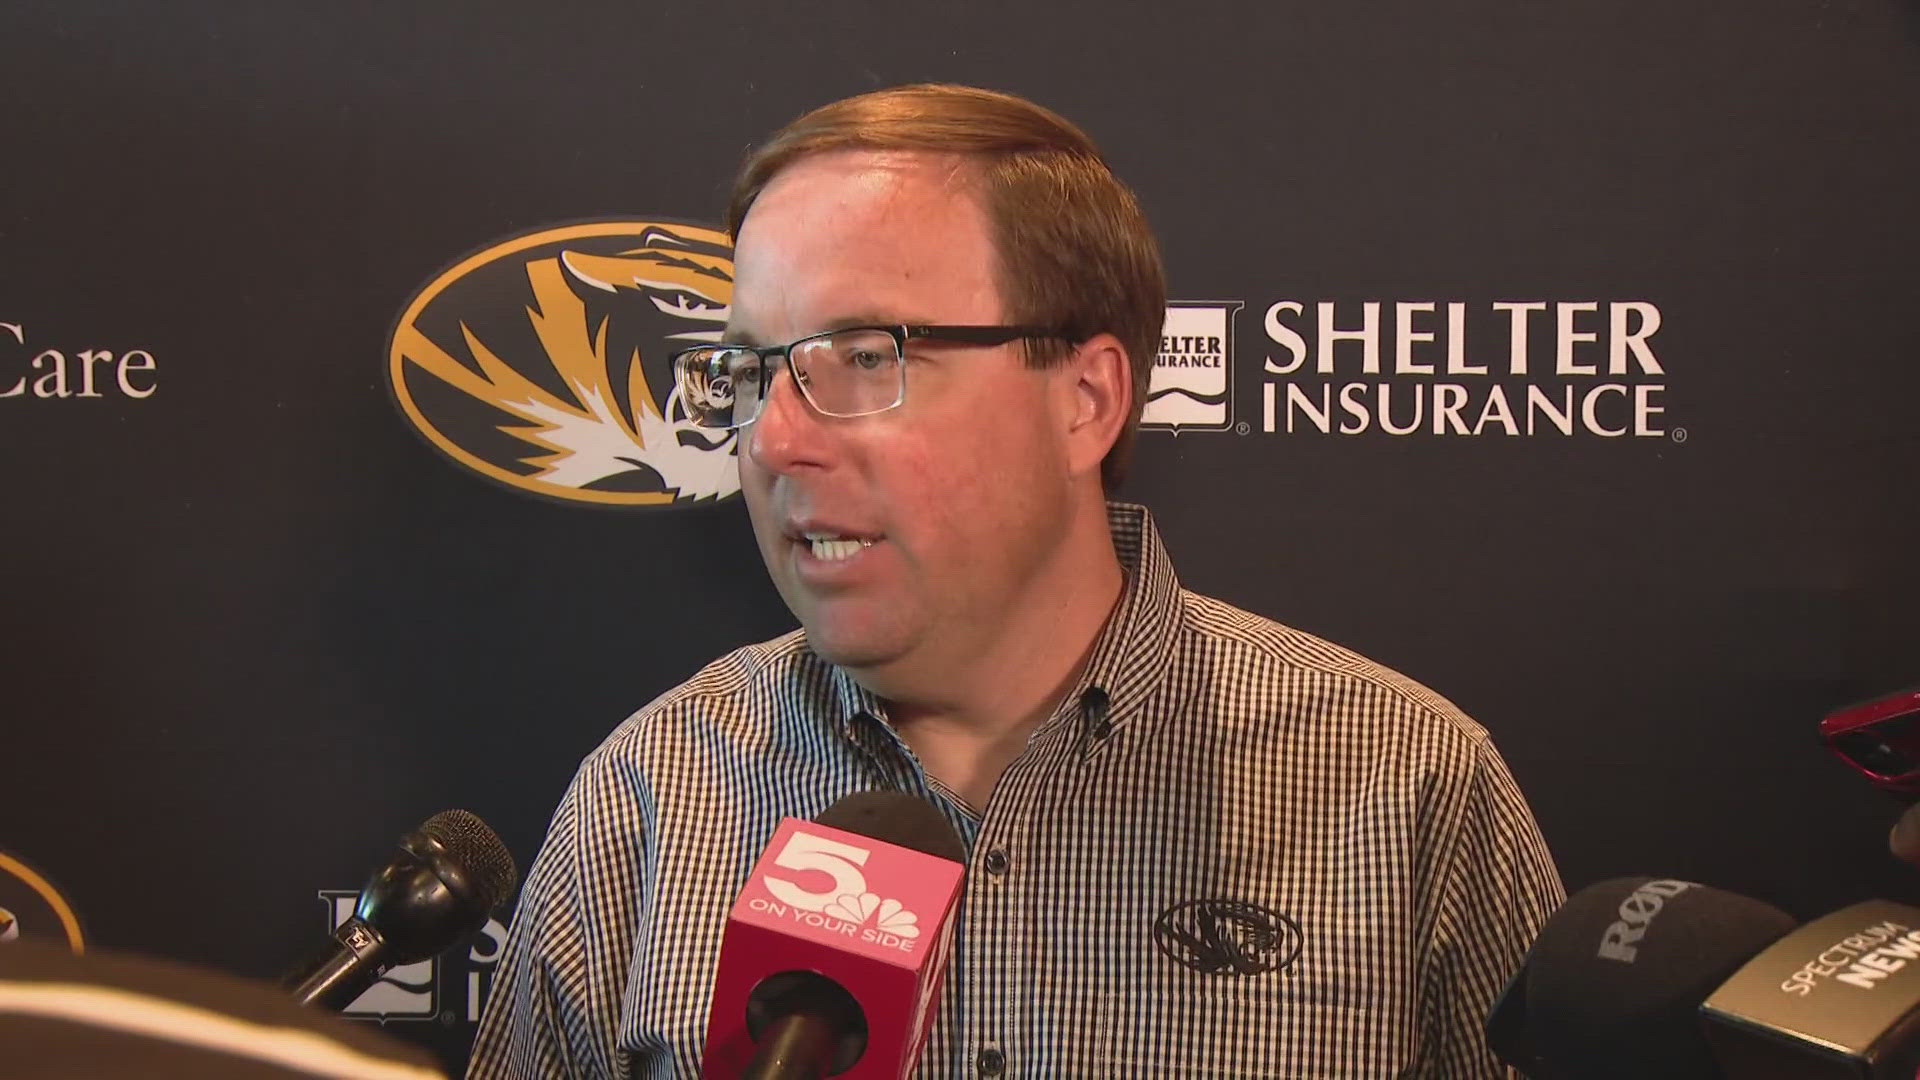 Over 700 Tiger fans were on hand to celebrate Mizzou sports at Chicken N Pickle in St. Charles. Mzzou's basketball and football head coaches were in attendance.